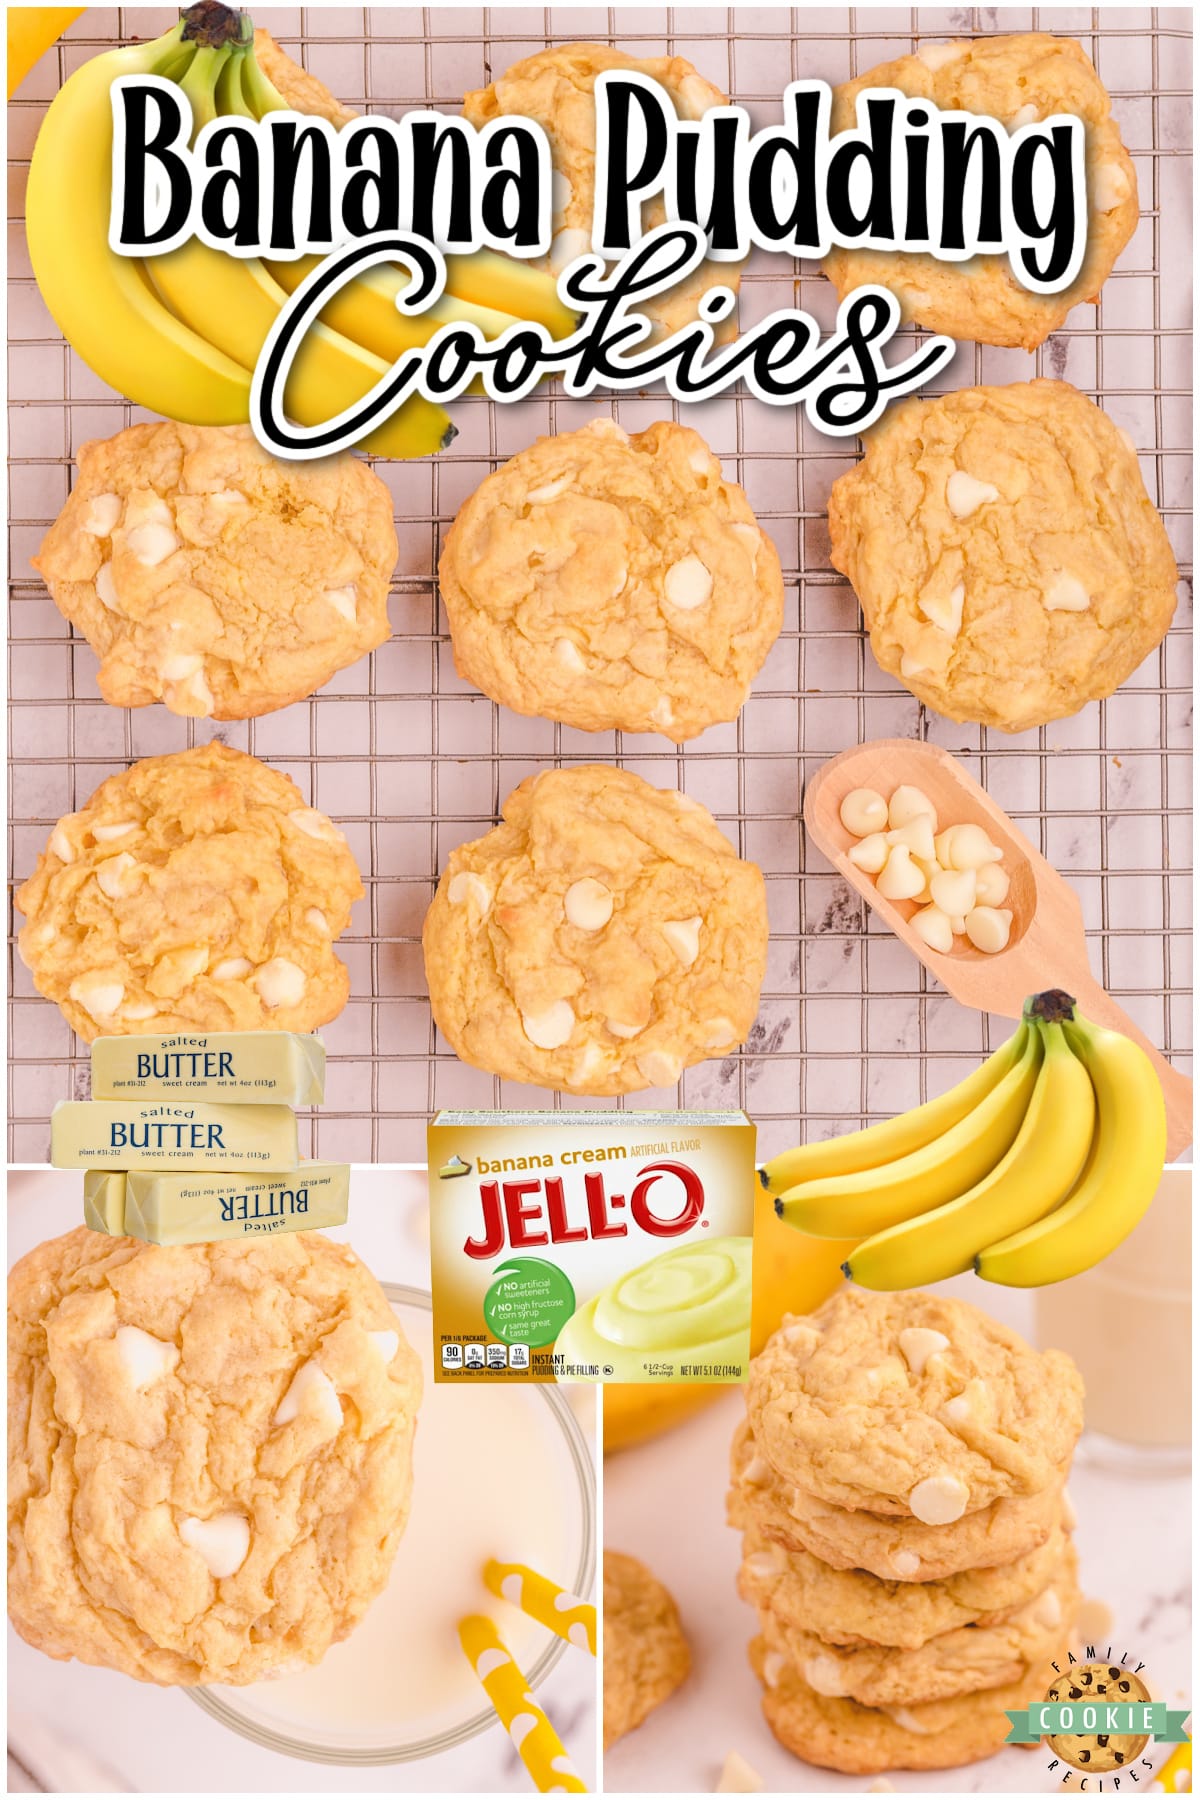 Banana Pudding Cookies made with a ripe banana for amazing pillowy soft cookies with great banana flavor! Banana cream cookies with pudding mix & white chocolate chips are delicious!